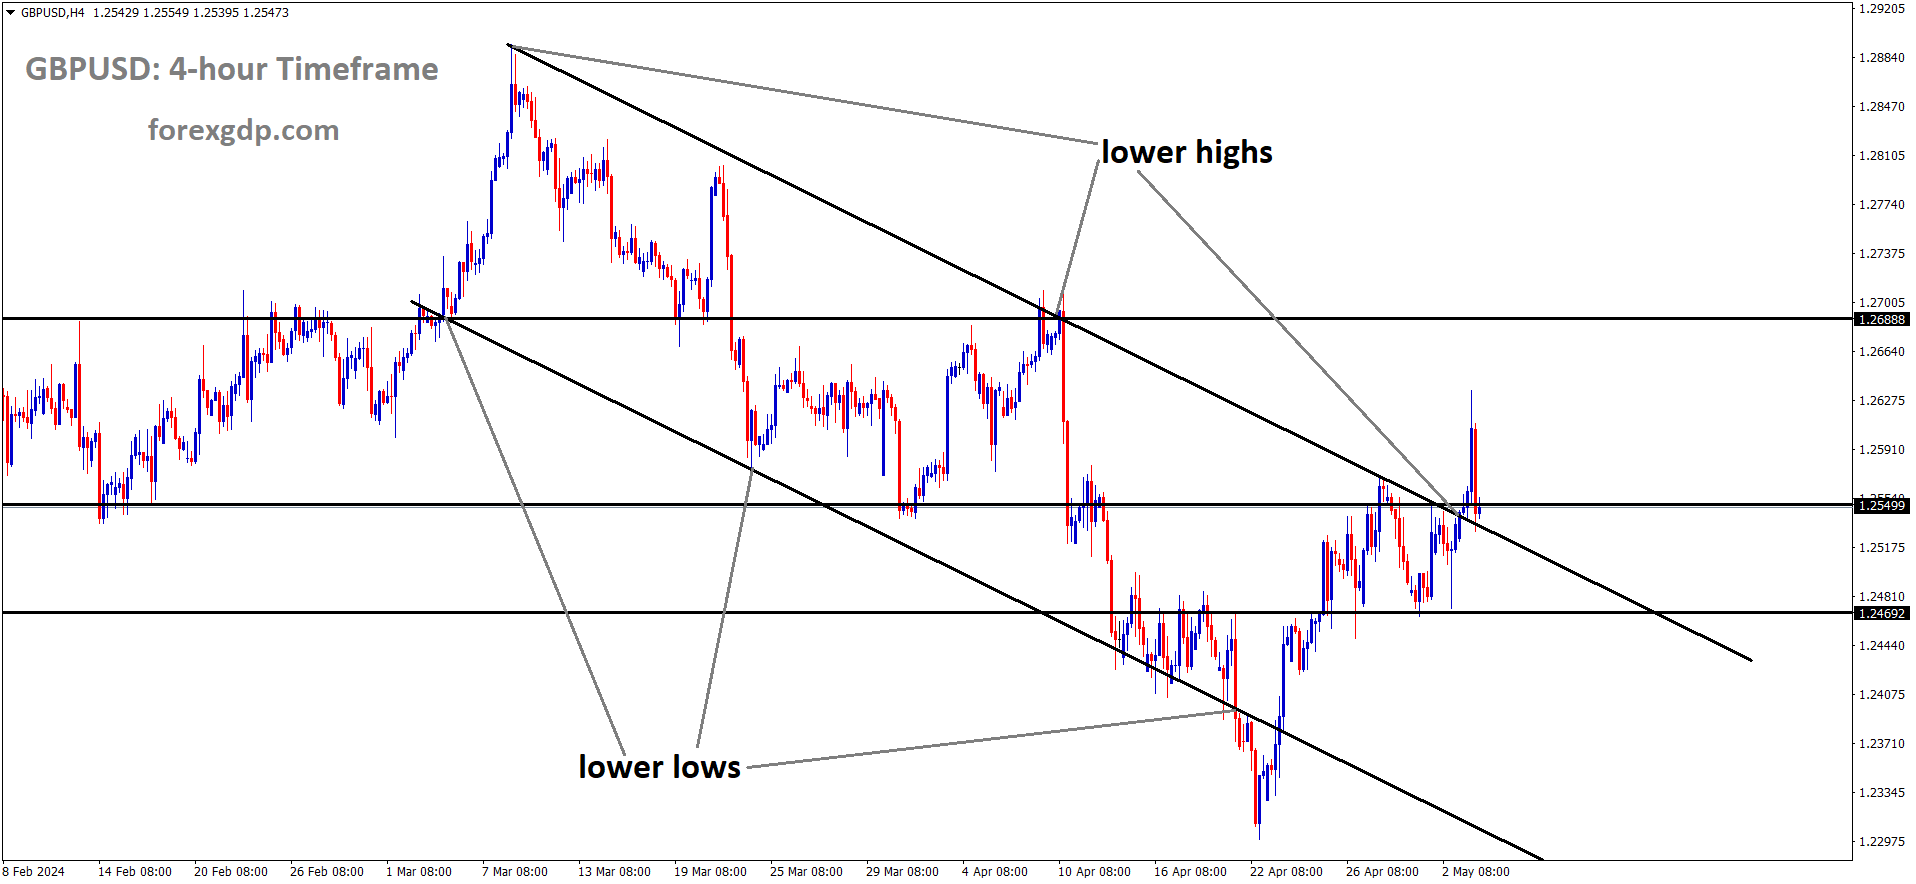 GBPUSD is moving in Descending channel and market has reached lower high area of the channel